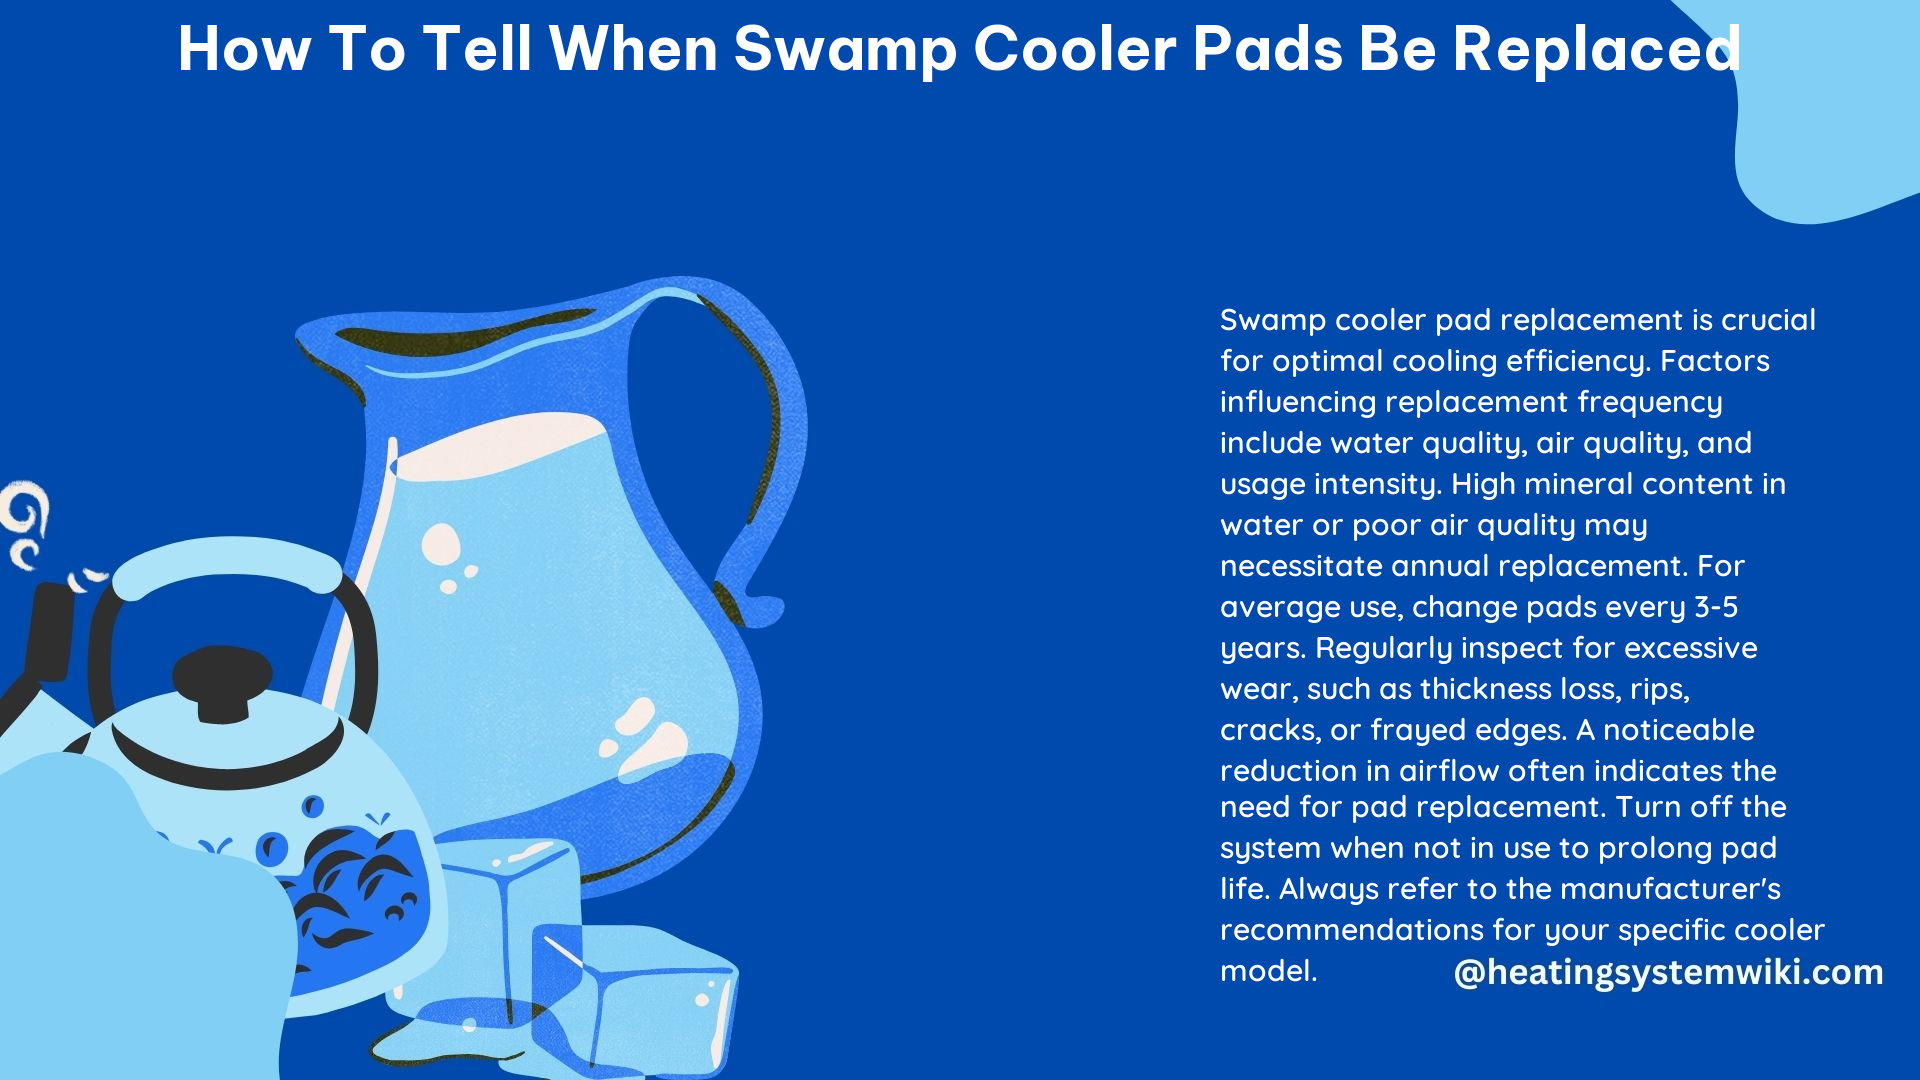 How to Tell When Swamp Cooler Pads Be Replaced